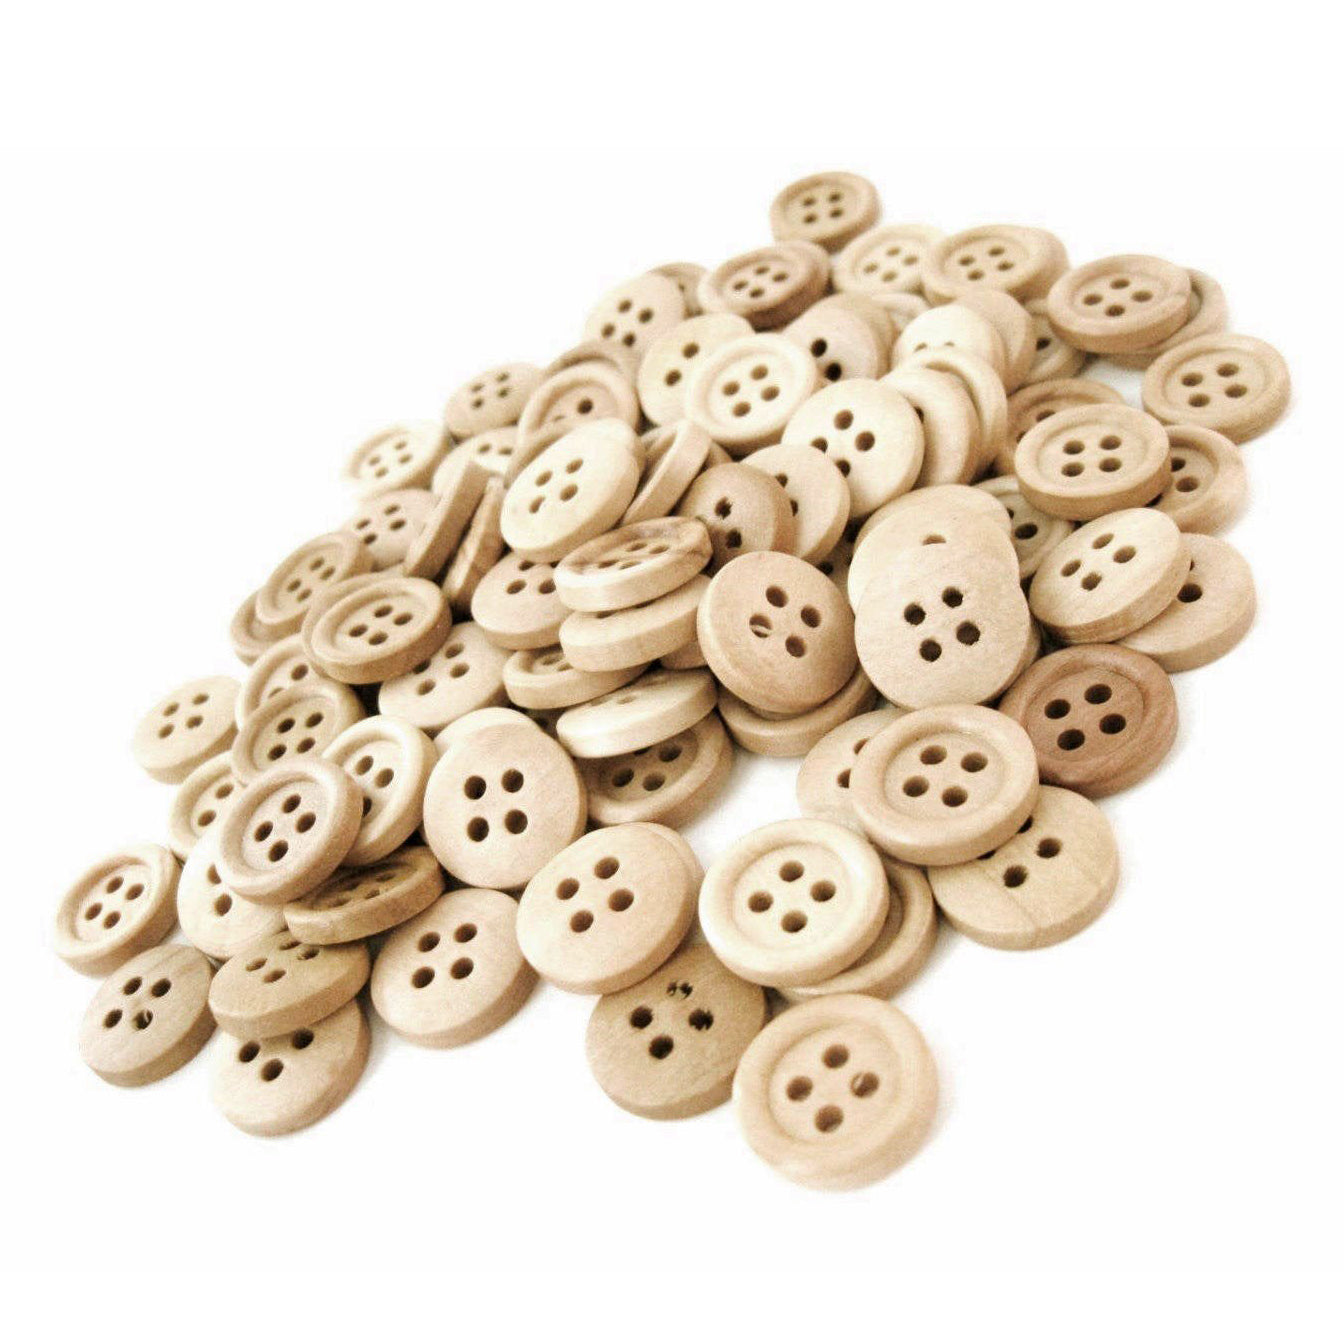 Wholesale Wooden buttons - Natural 4 Holes Wood Sewing Buttons 15mm - set of 60